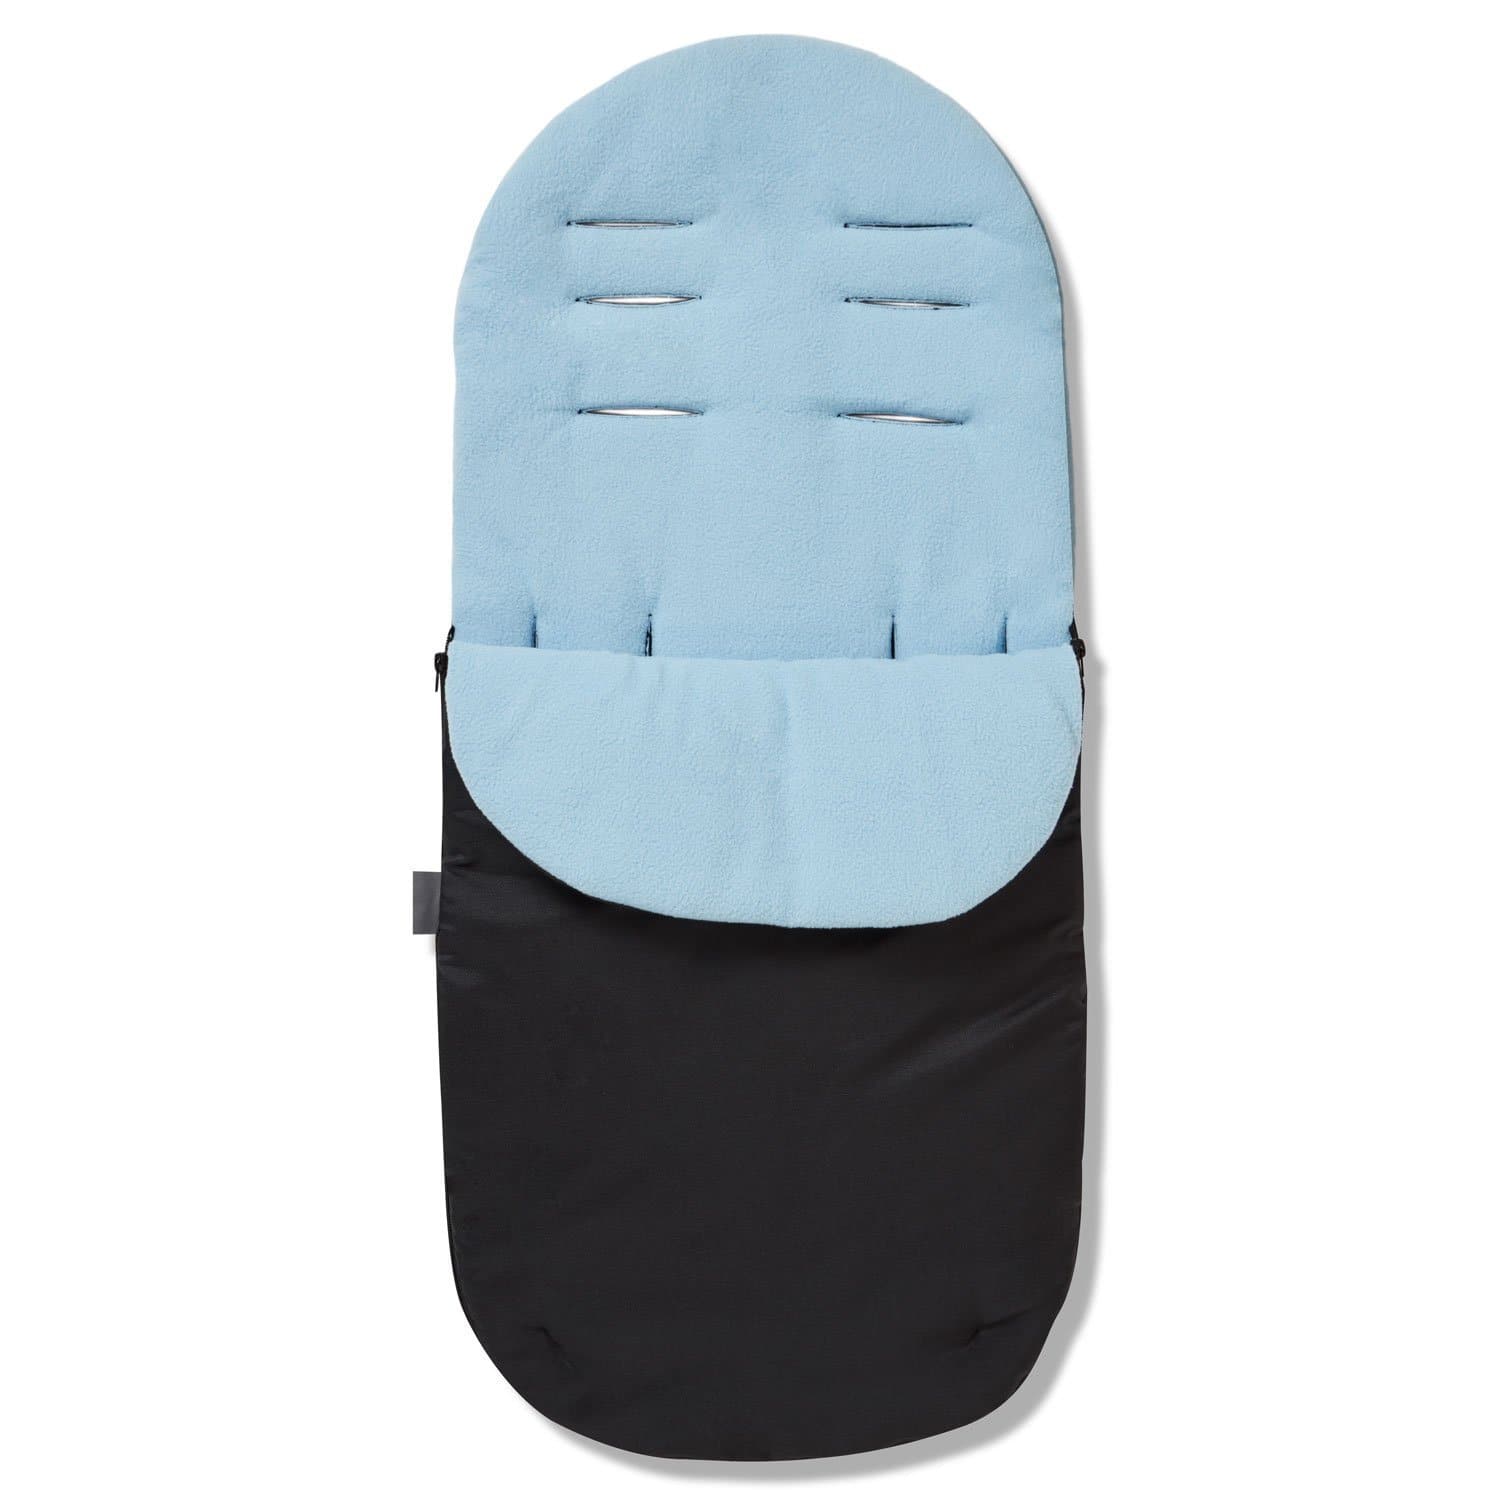 Footmuff / Cosy Toes Compatible with Looping - Light Blue / Fits All Models | For Your Little One